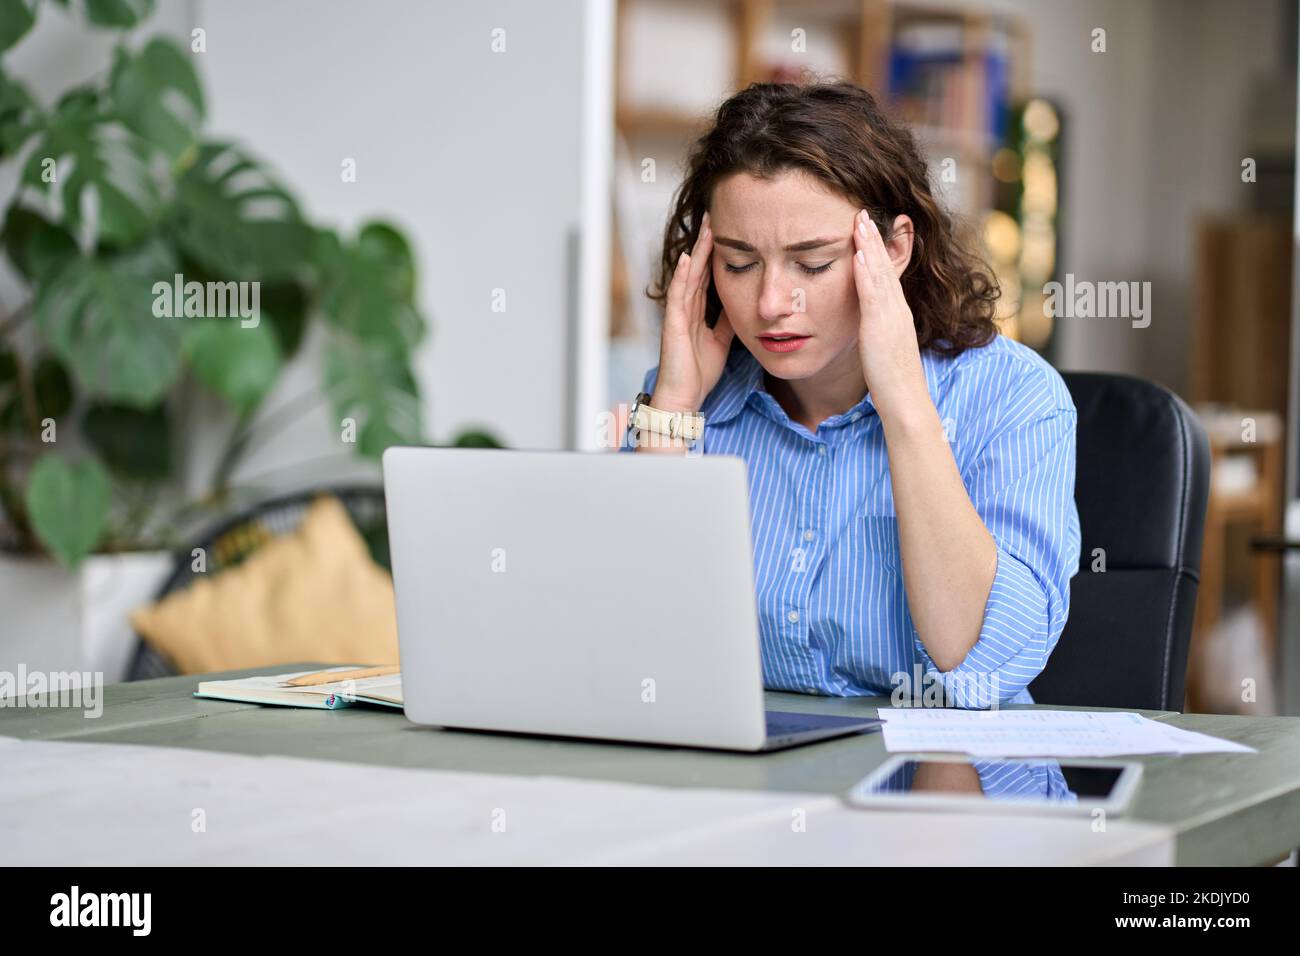 Stressed young woman employee touching head feeling headache fatigue at work. Stock Photo